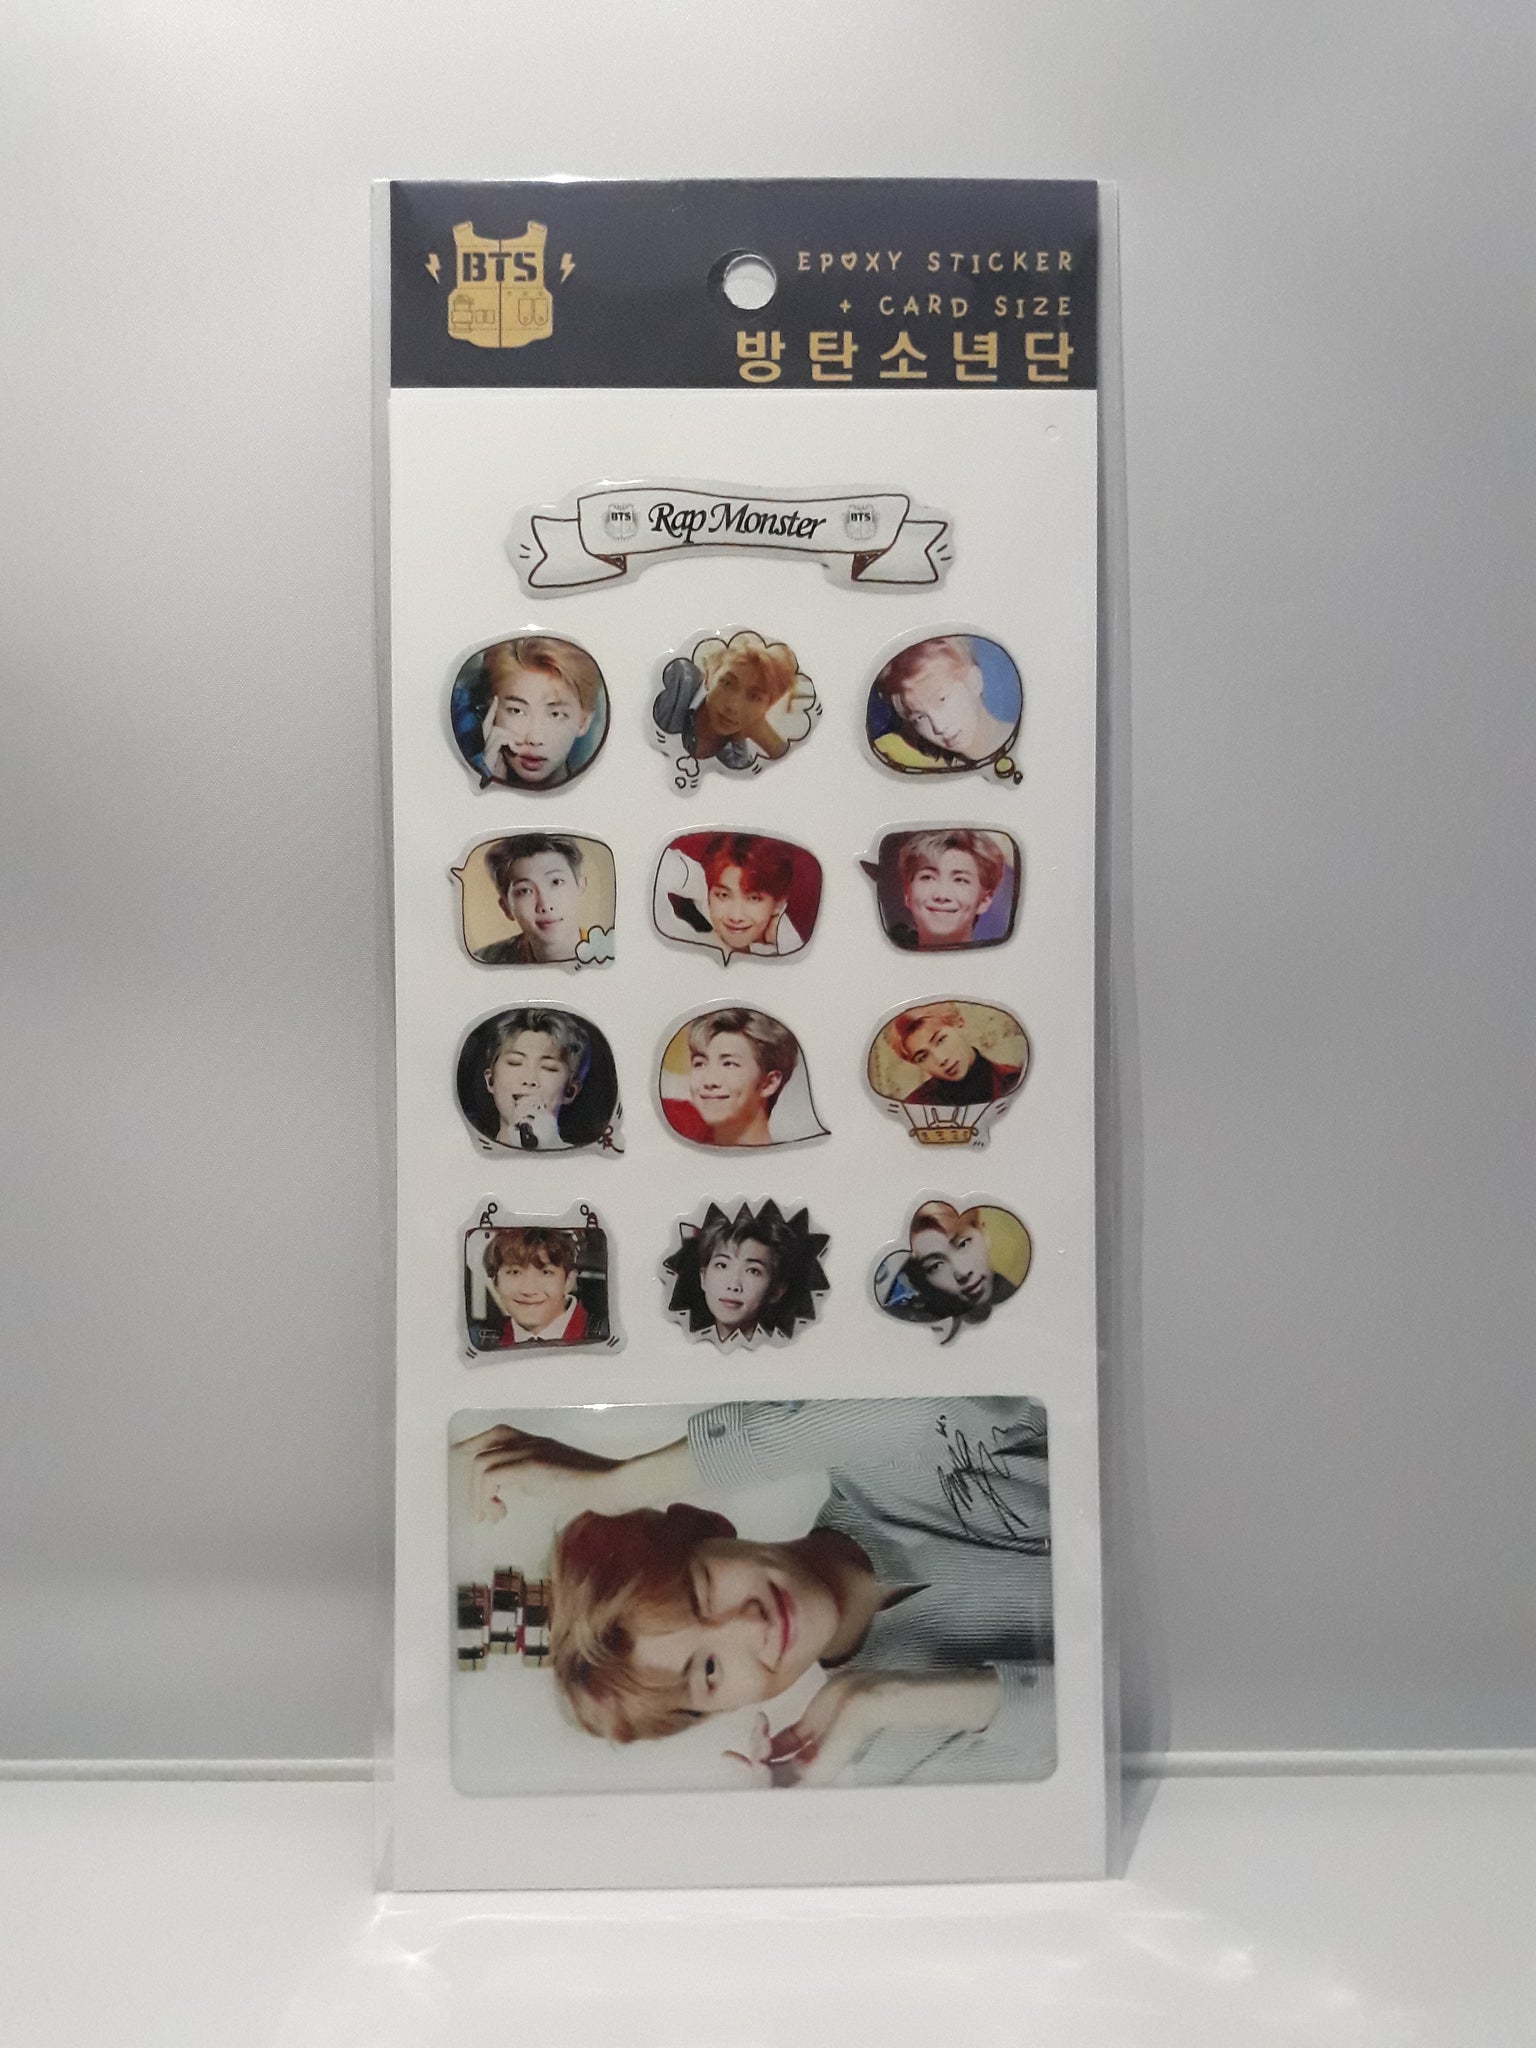 Epoxy Sticker and Card Size - BTS RM